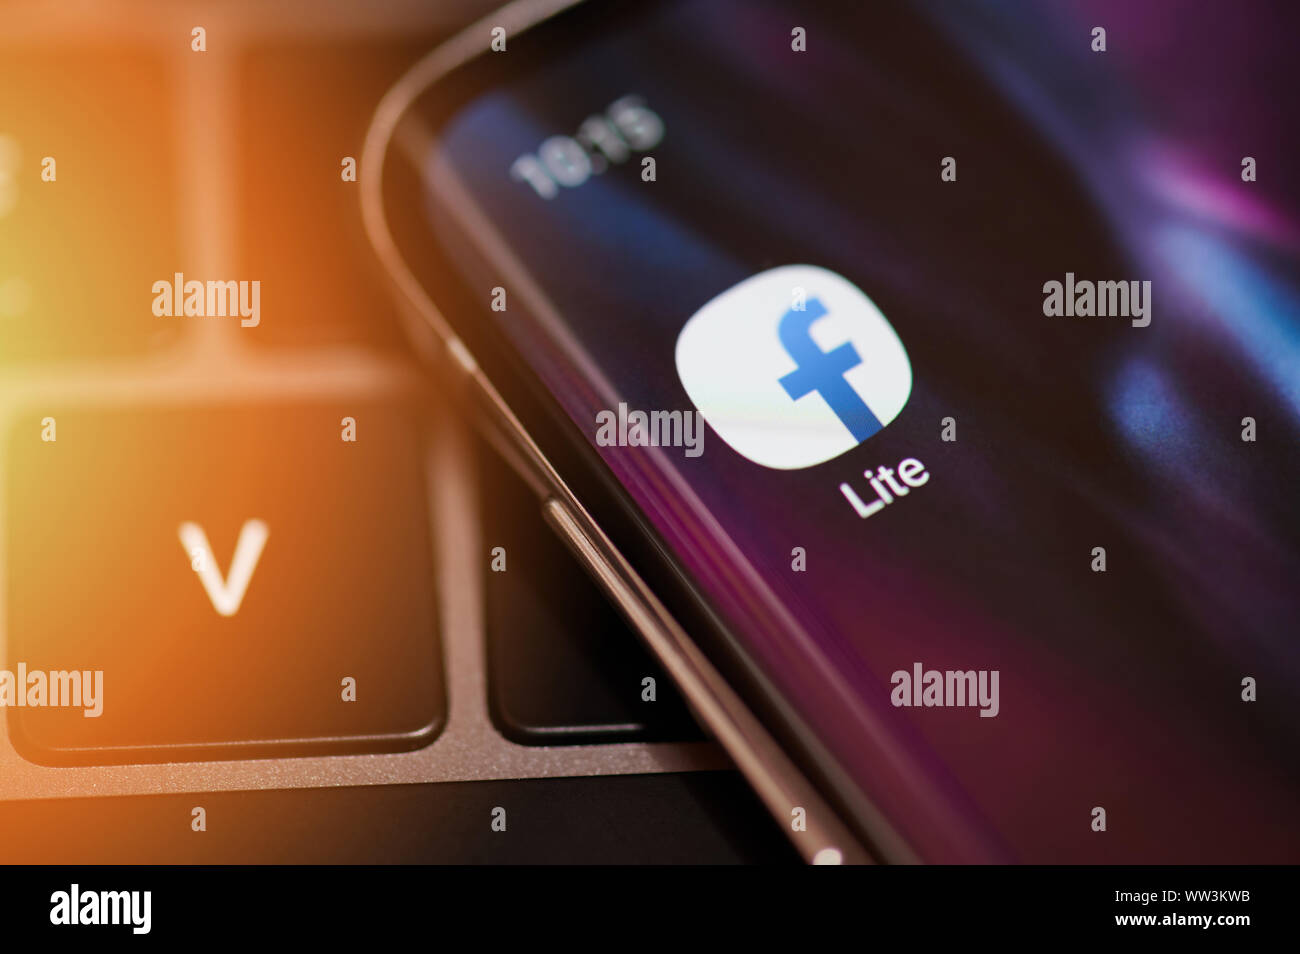 New york, USA - september 12, 2019: Facebook lite social media icon in smartphone screen close up view Stock Photo